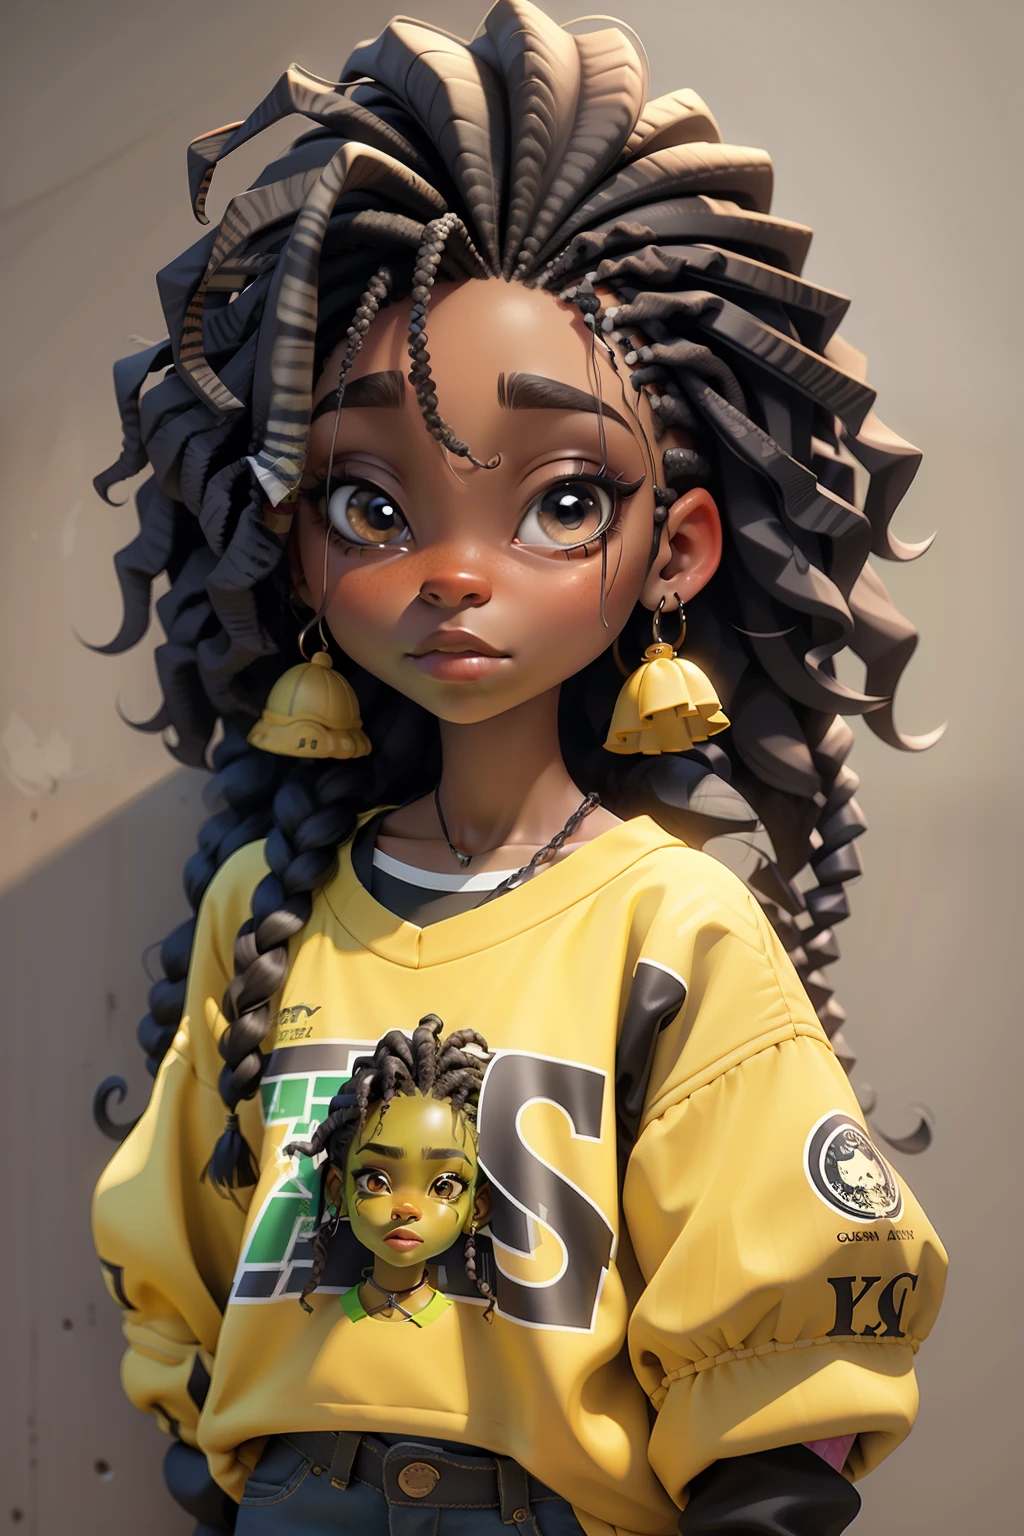 Masterpiece artwork, best qualityer, 3d rendering work, styled, close-up, portraite, 3d, 1girl, 独奏, Kizi, Lena head, cabelo dreads , Bblack hair, skate, freckles, jewelly, cabelo de dois tons cacheado styled rasta, looking at side, summer style clothing, beboy  arte de rua, realisitic, all-body, simple background, bangss, looking off into distance, shorth hair, separated-lips, eyes black, , Gothic, choker, make-up, mole, black jersey, watermark